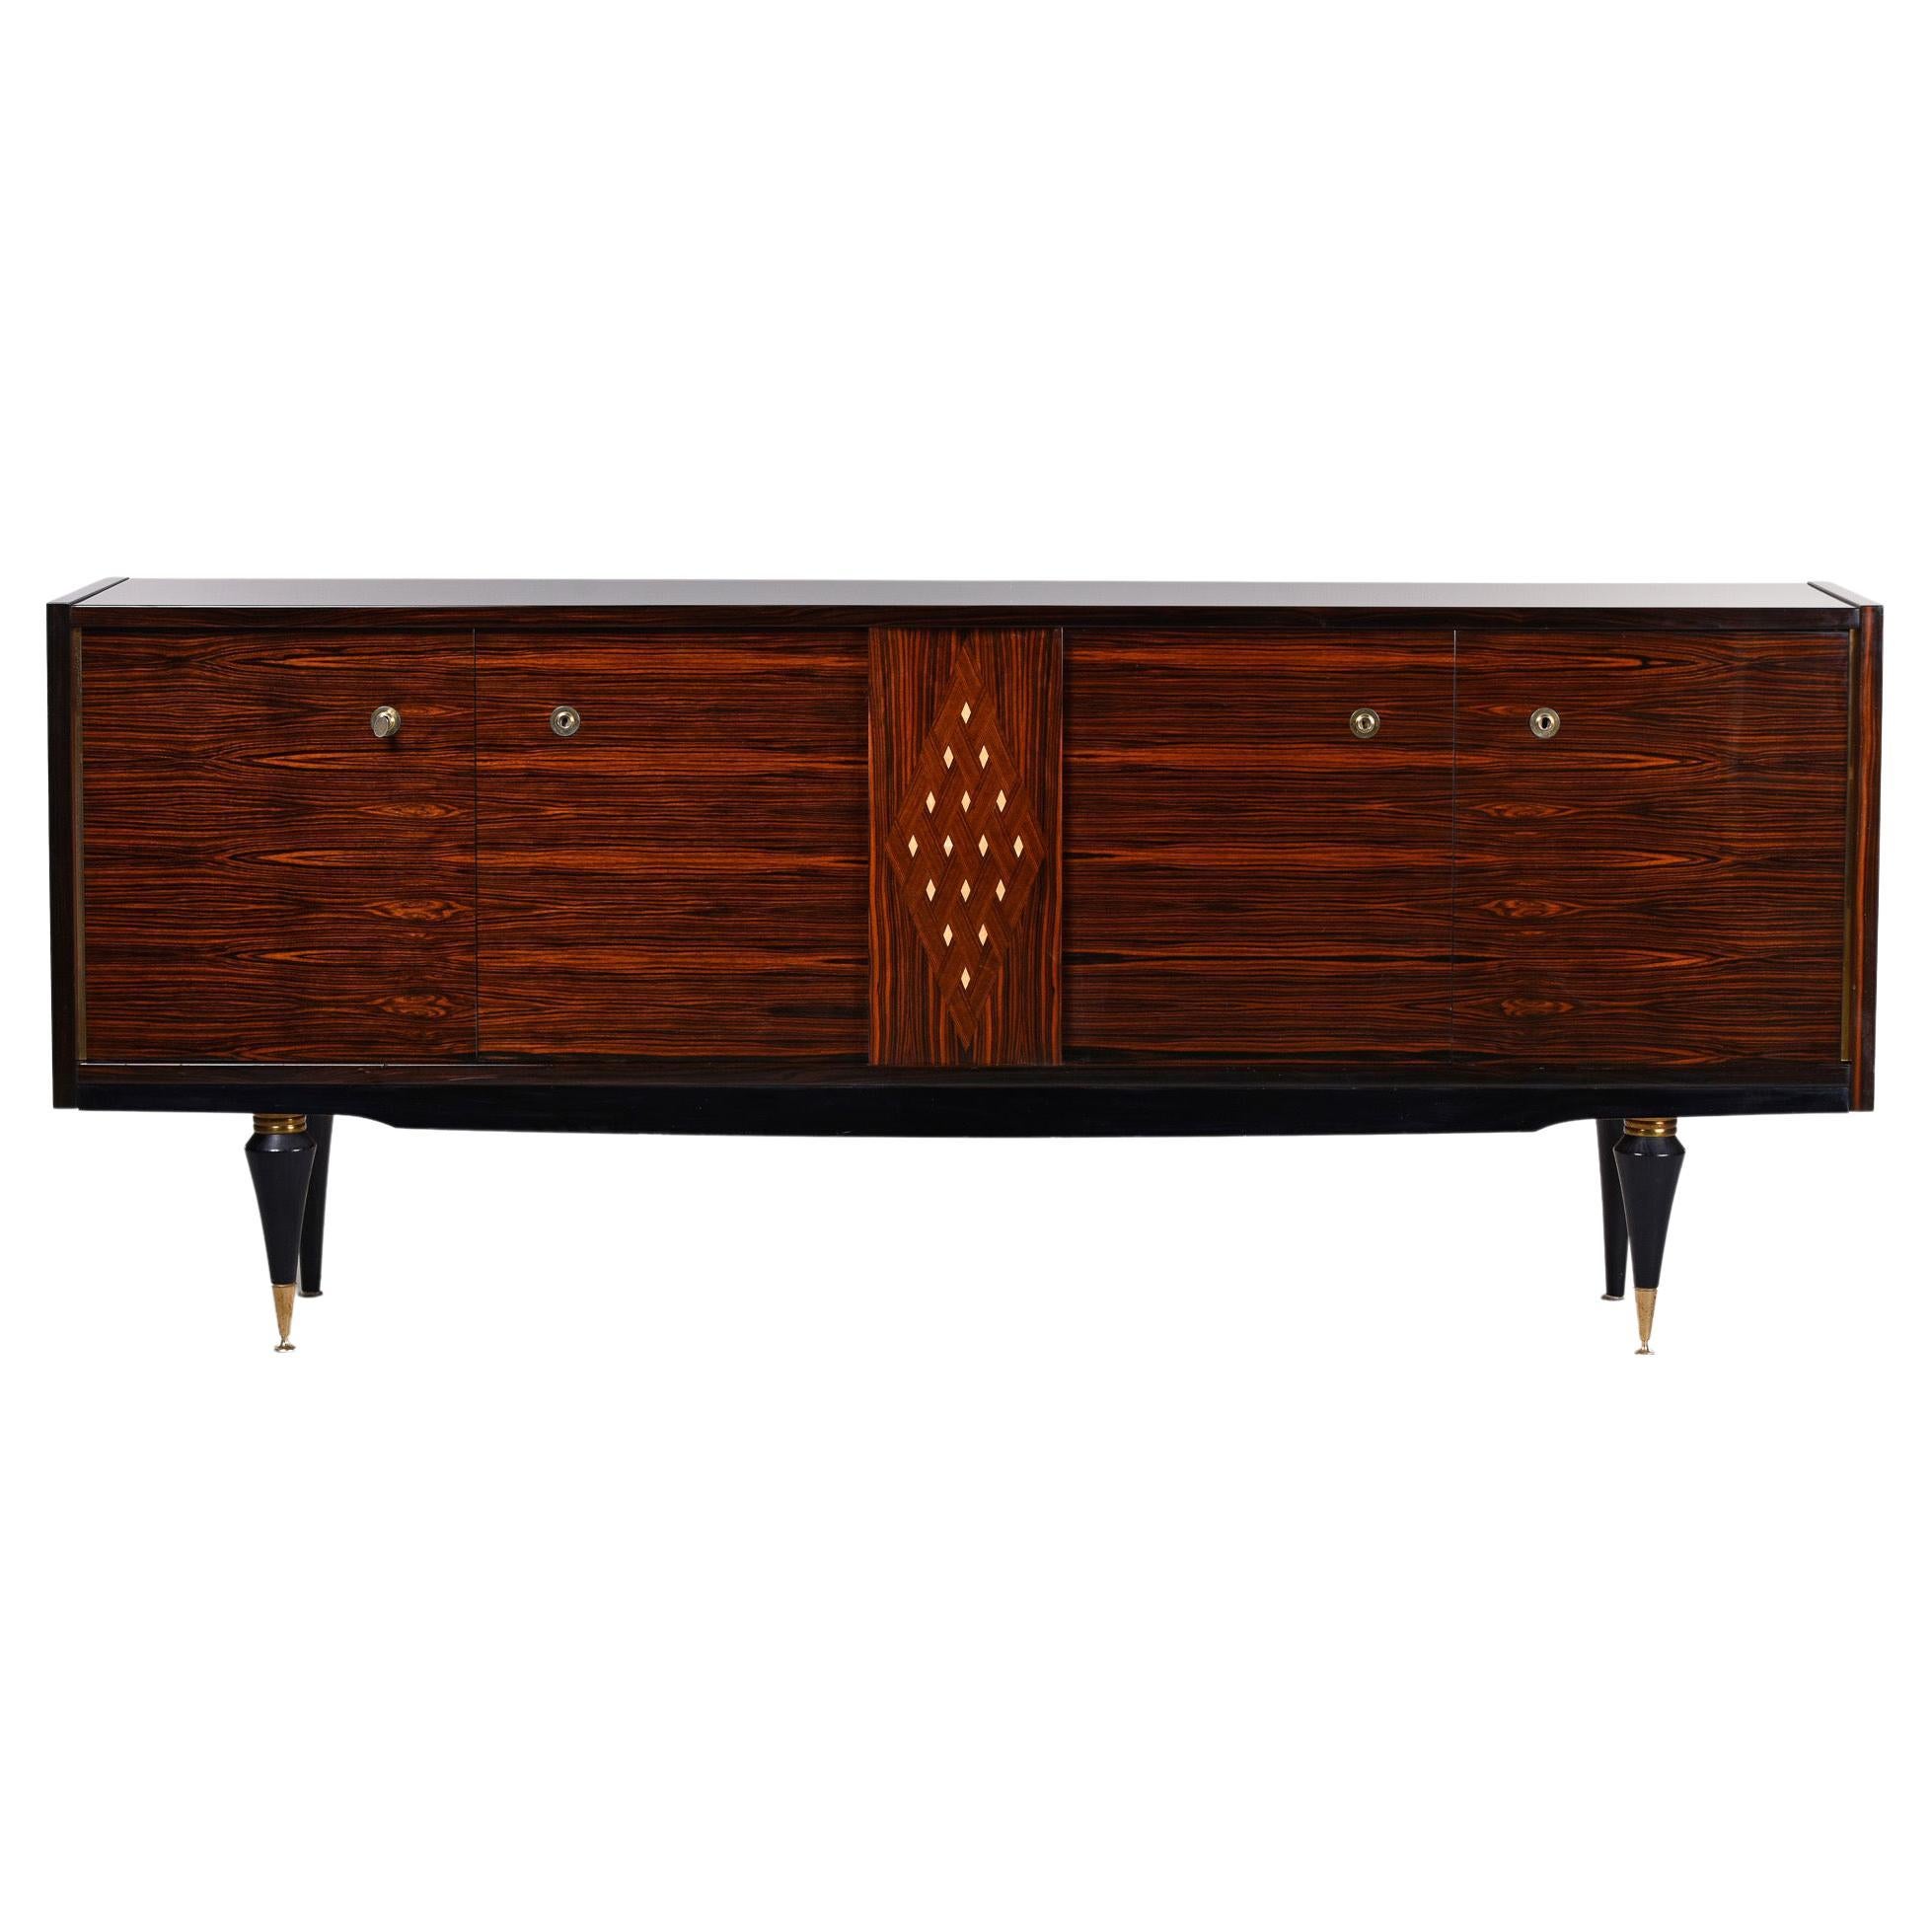 French Deco Modernist Macassar Buffet or Credenza with Diamond Pattern Inlay